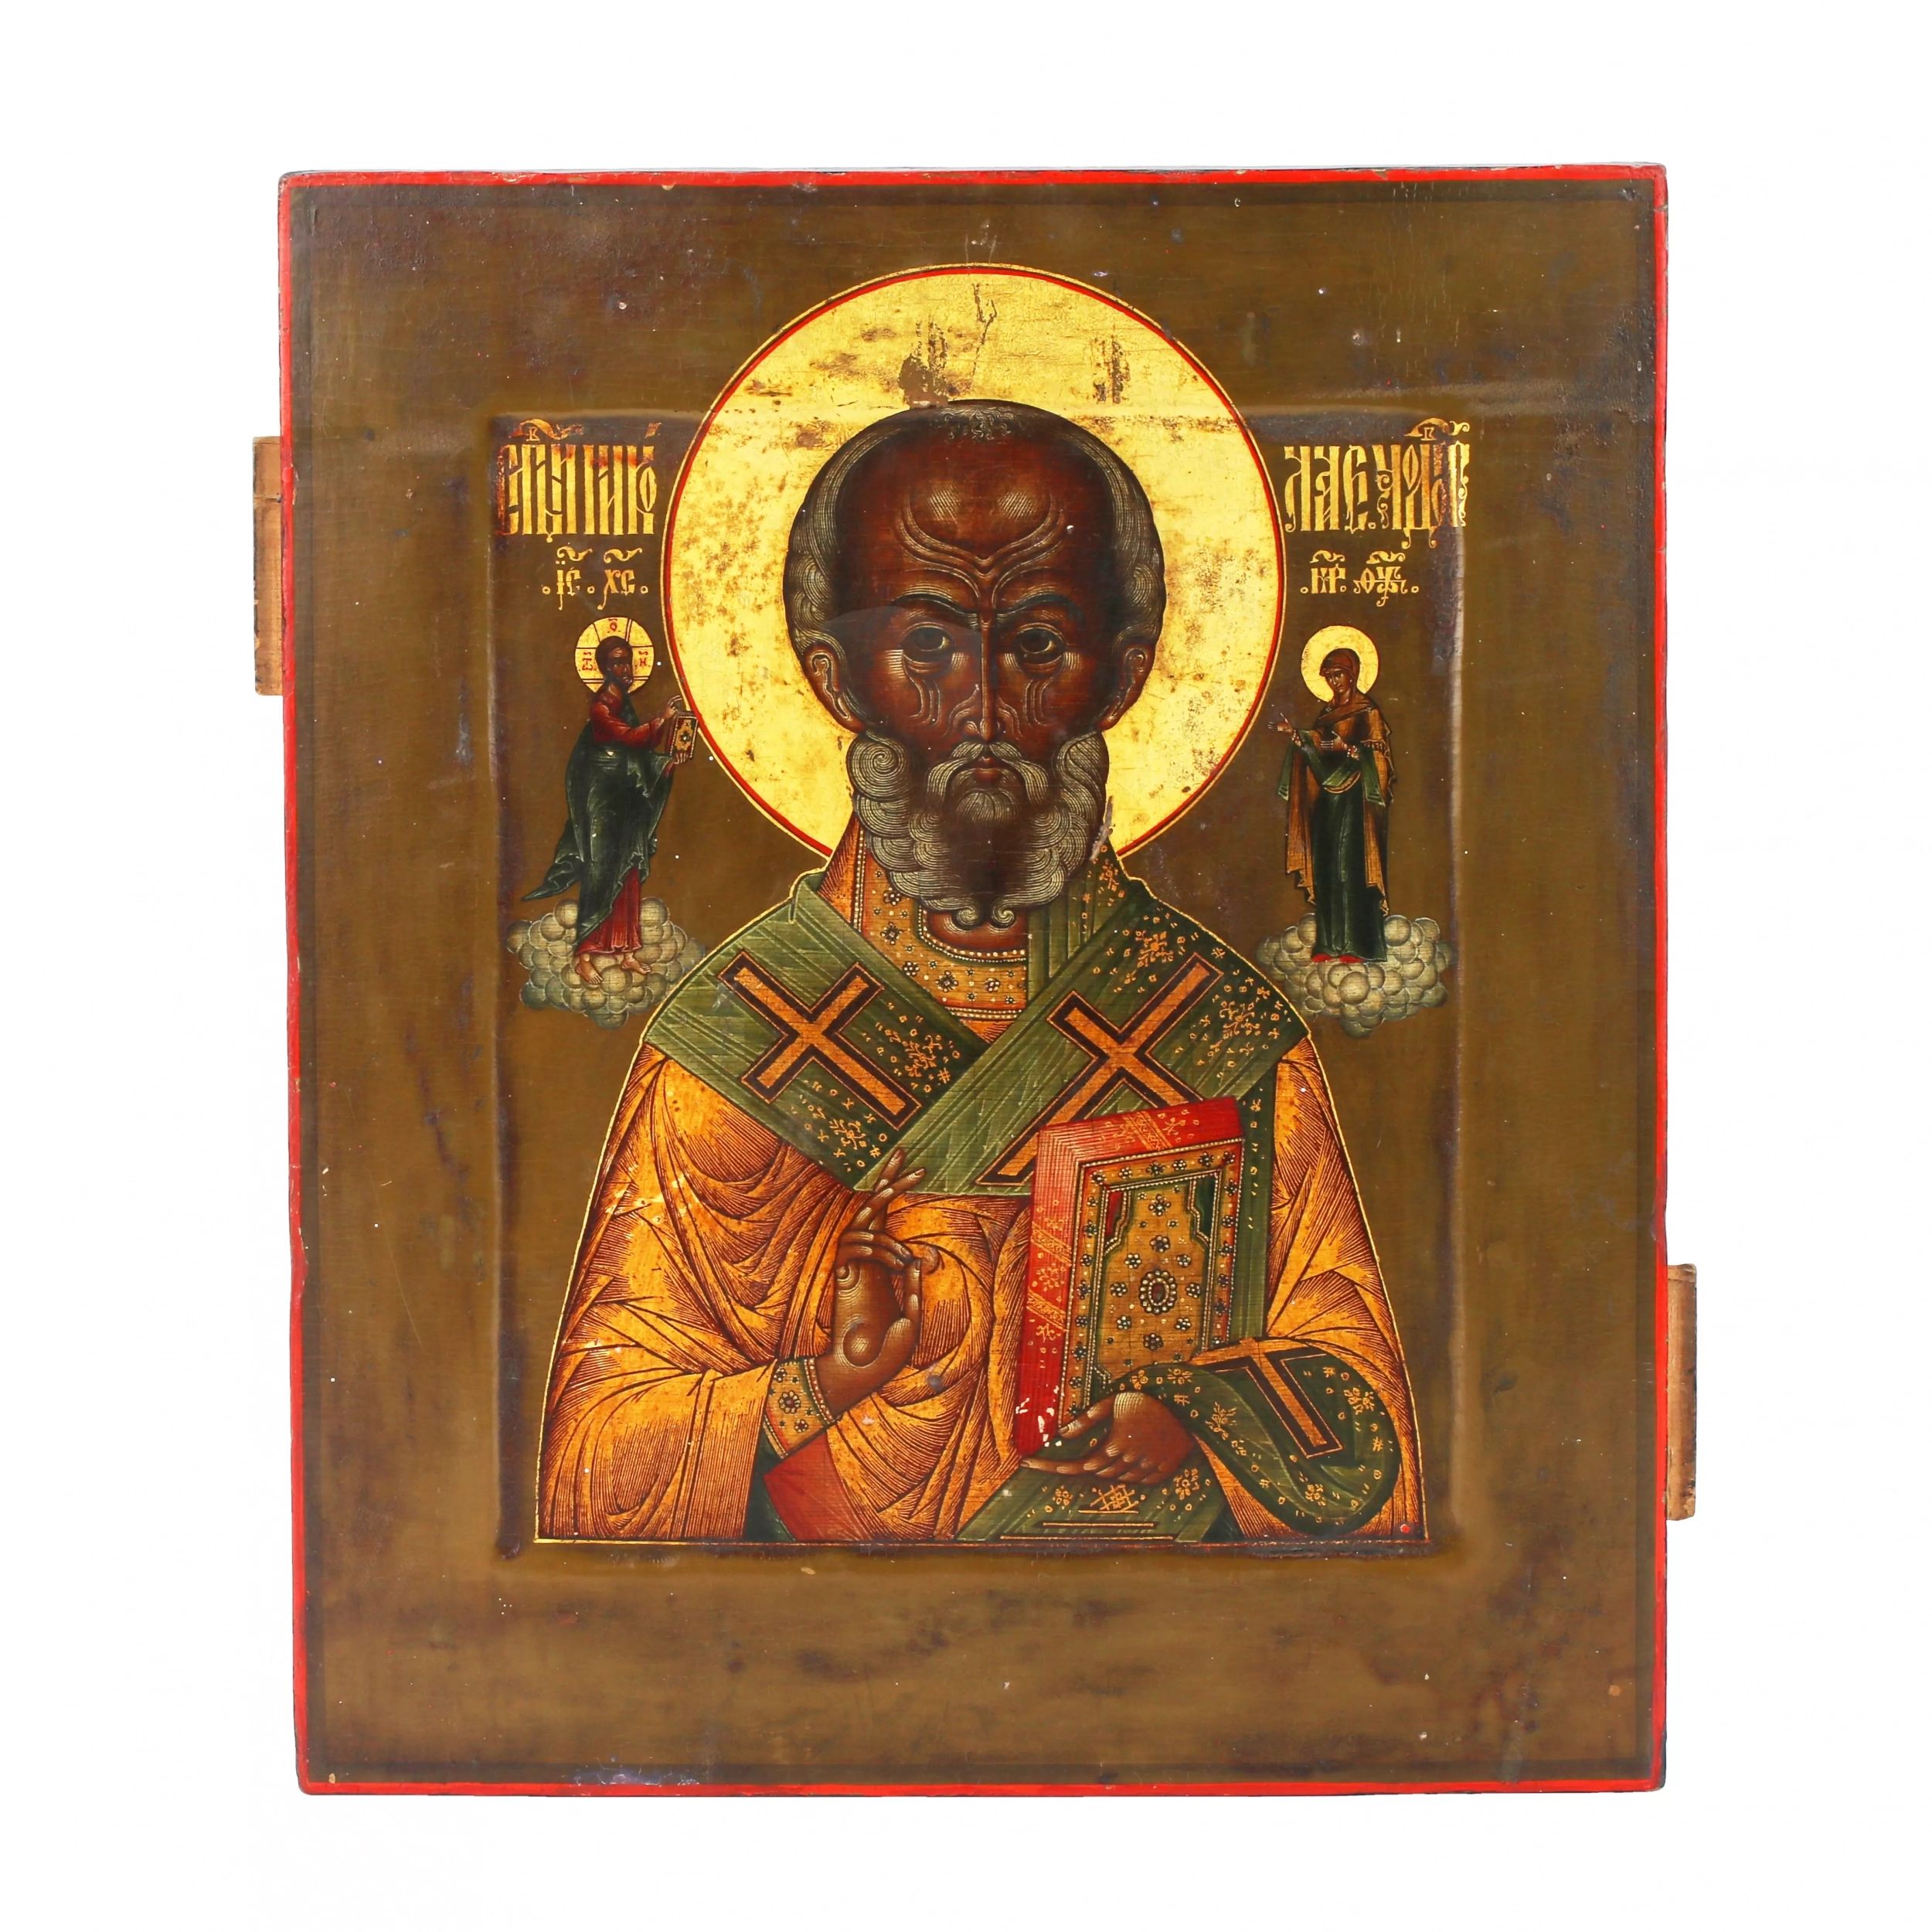 Analogue-icon-of-St-Nicholas-second-half-of-the-19th-century-